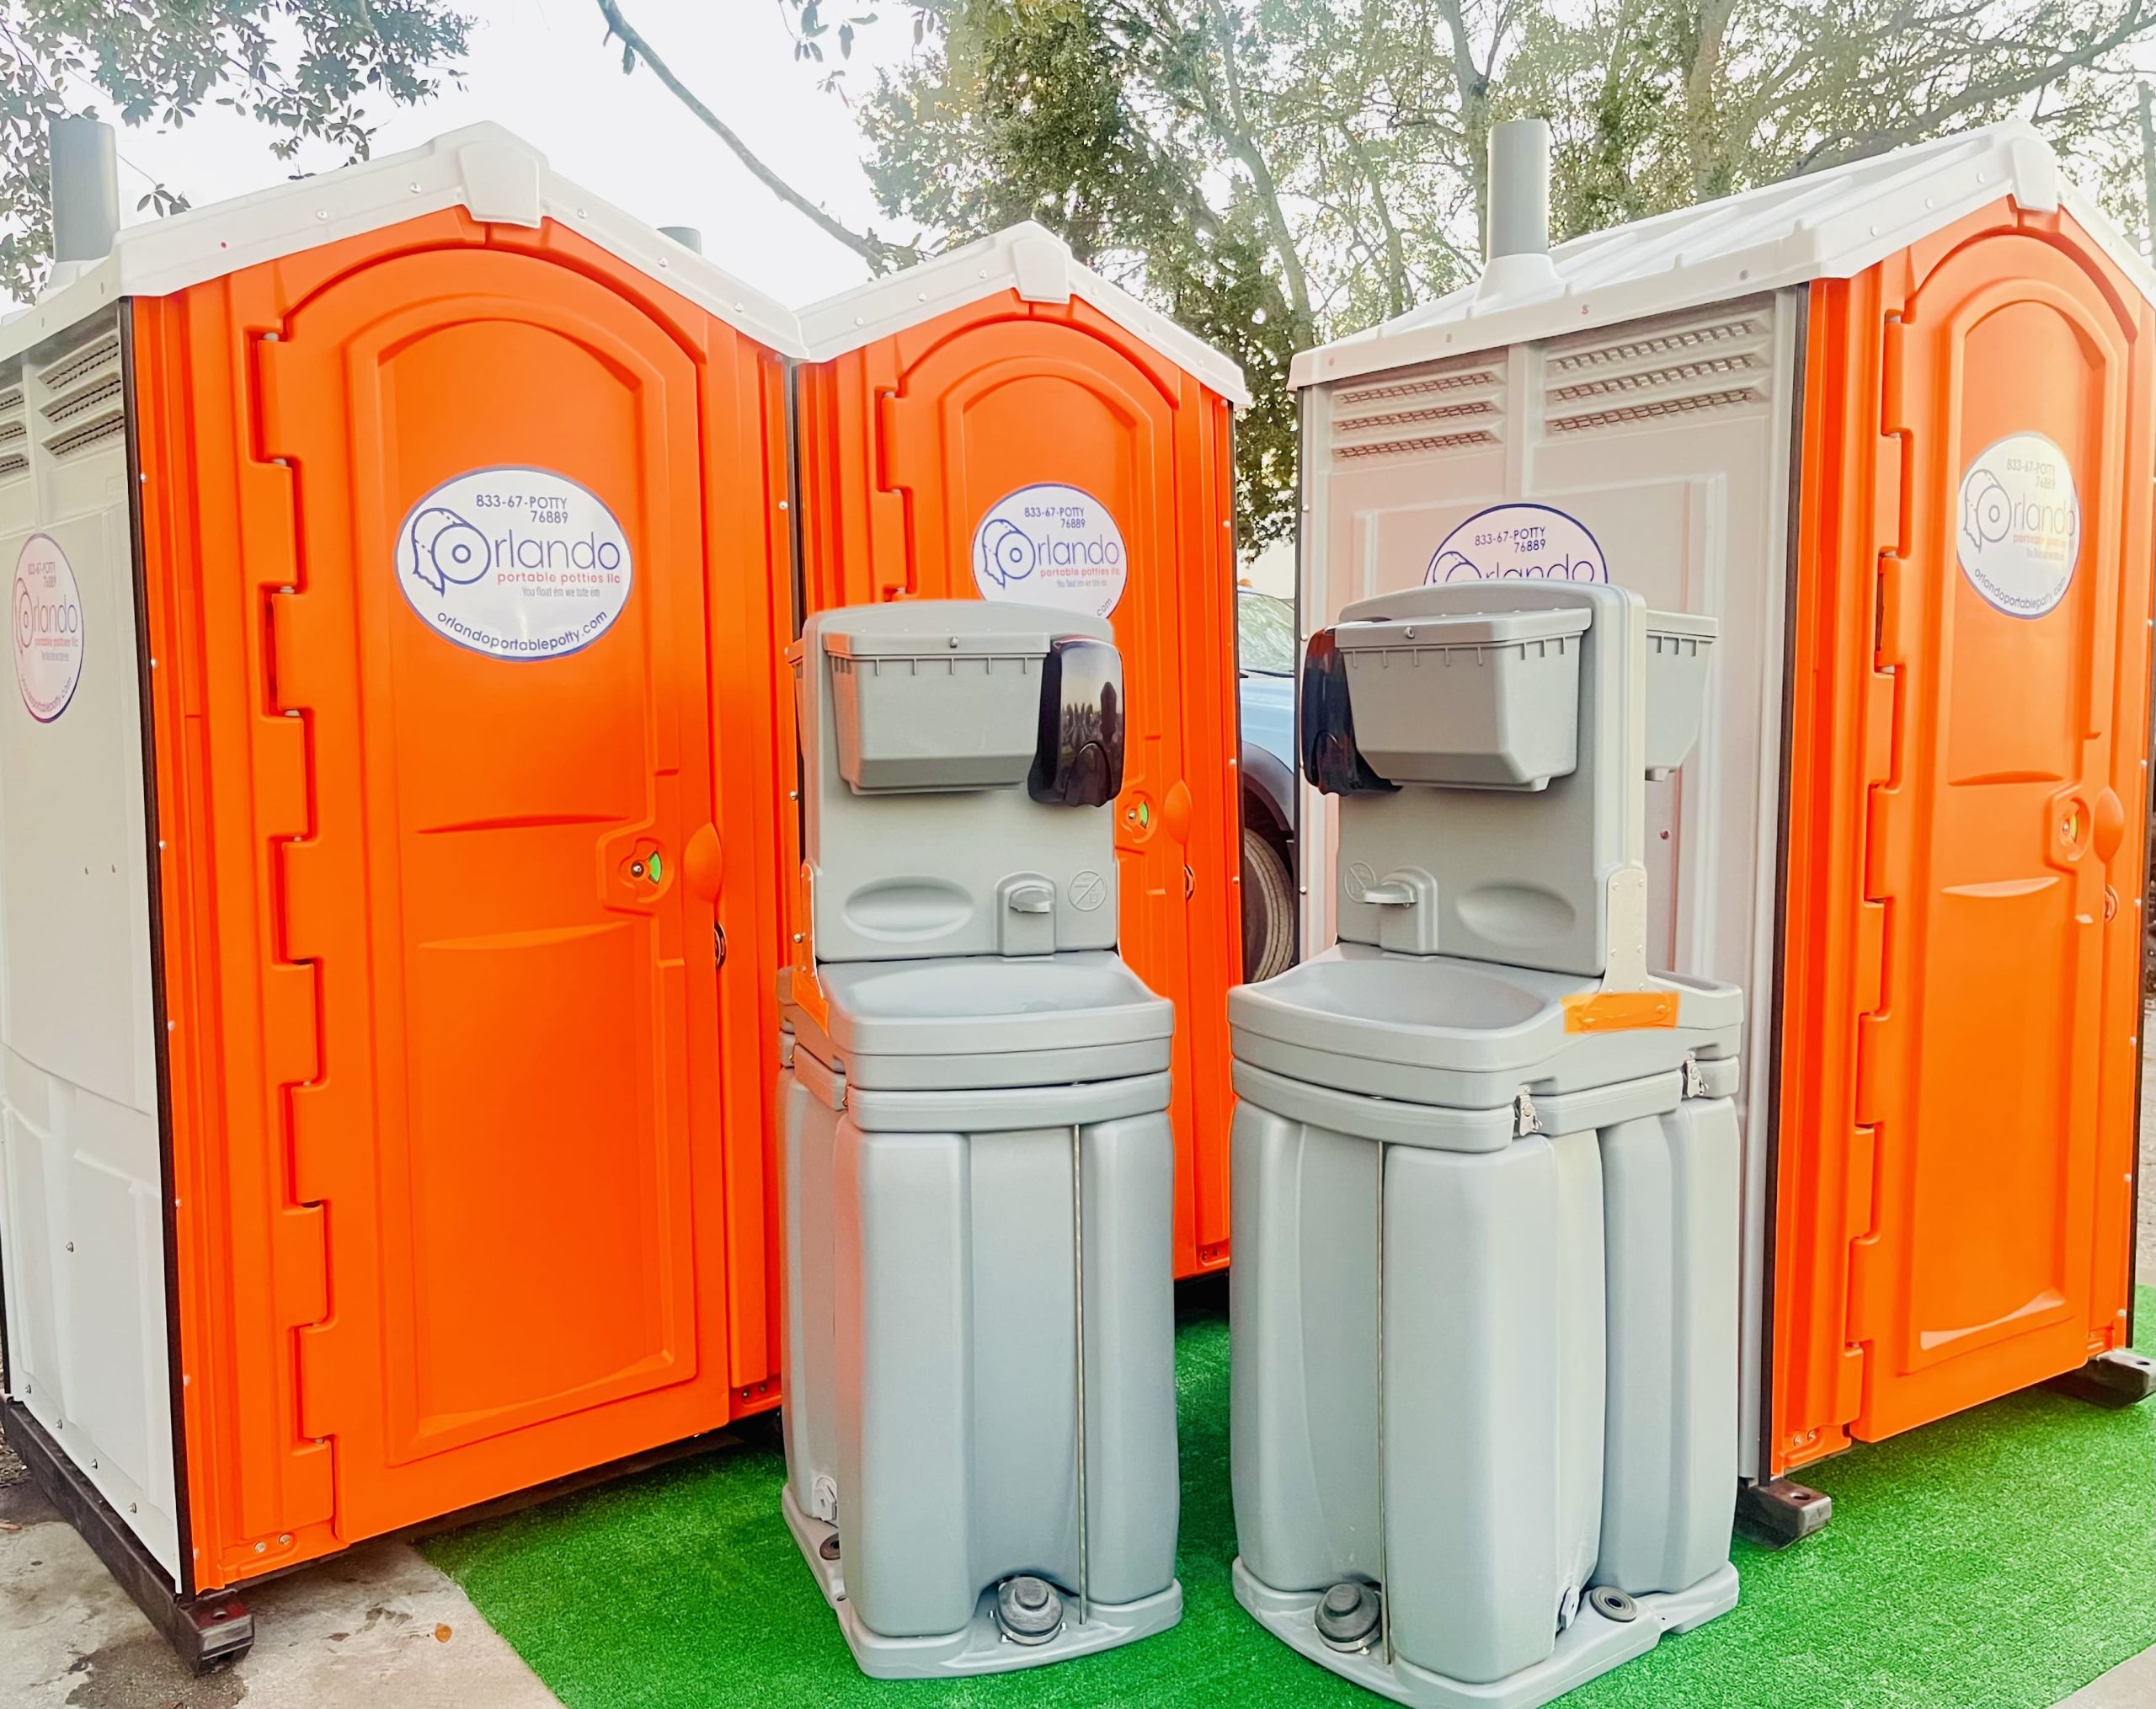 When you choose Orlando Portable Potties rentals you’r choosing to work with local, small, family owned business.